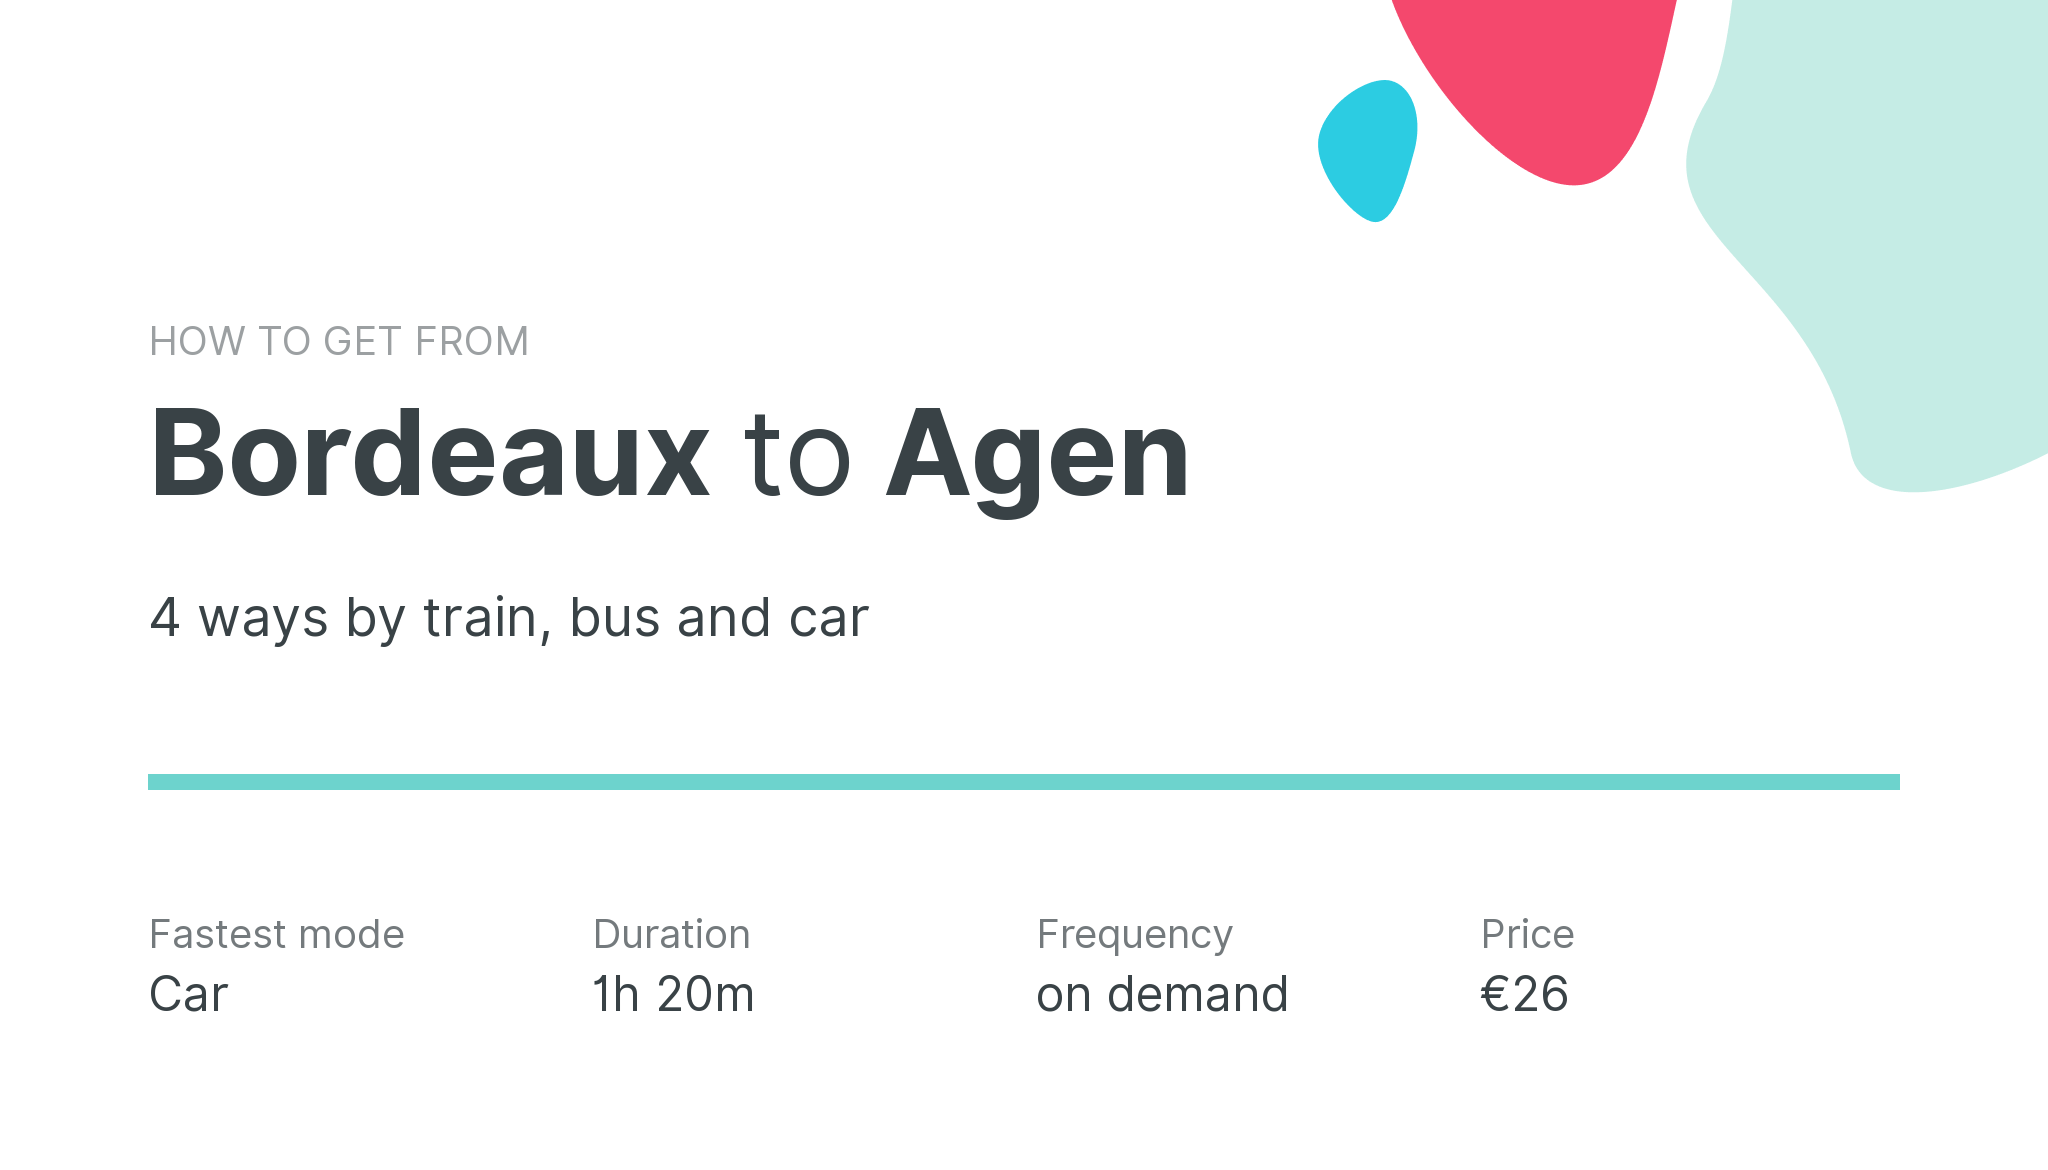 How do I get from Bordeaux to Agen